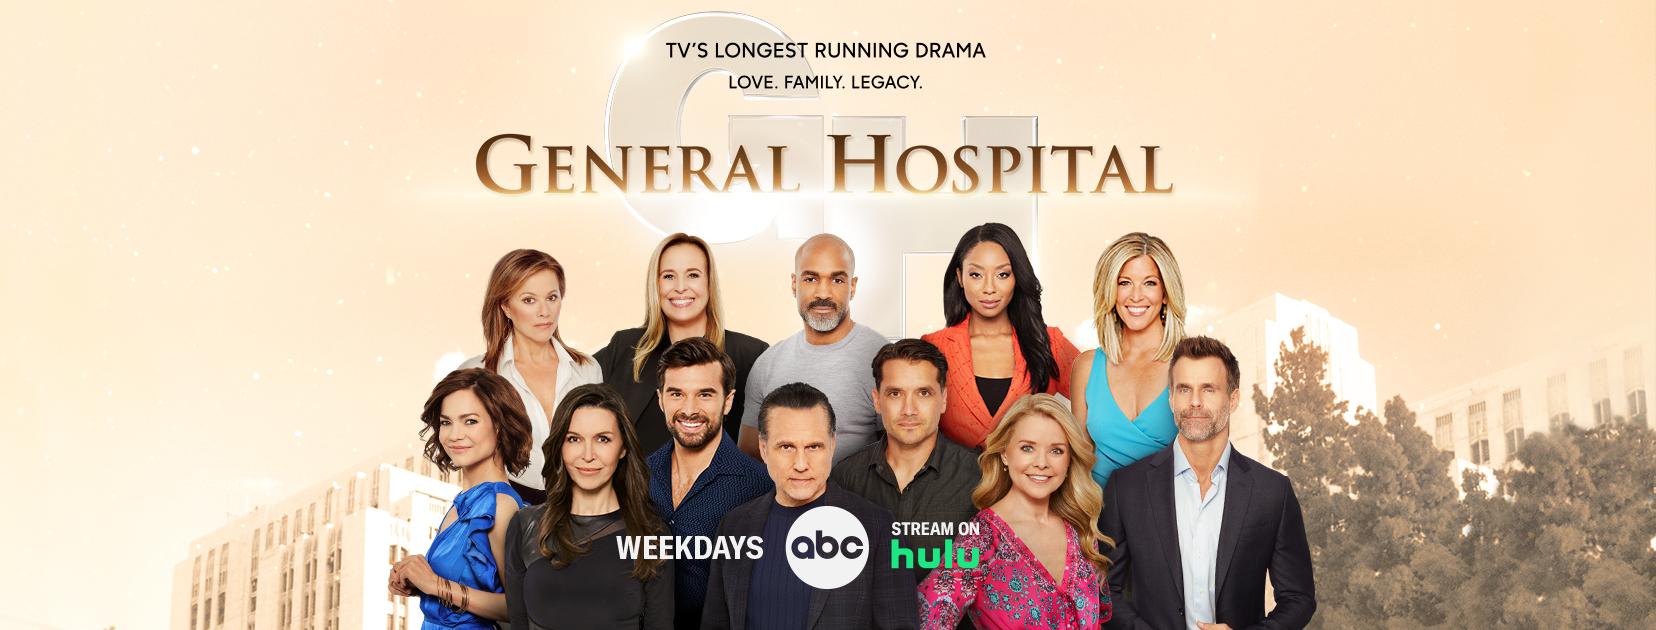 Why Daytime Soap Operas Won't Be Impacted By The SAG-AFTRA Strike